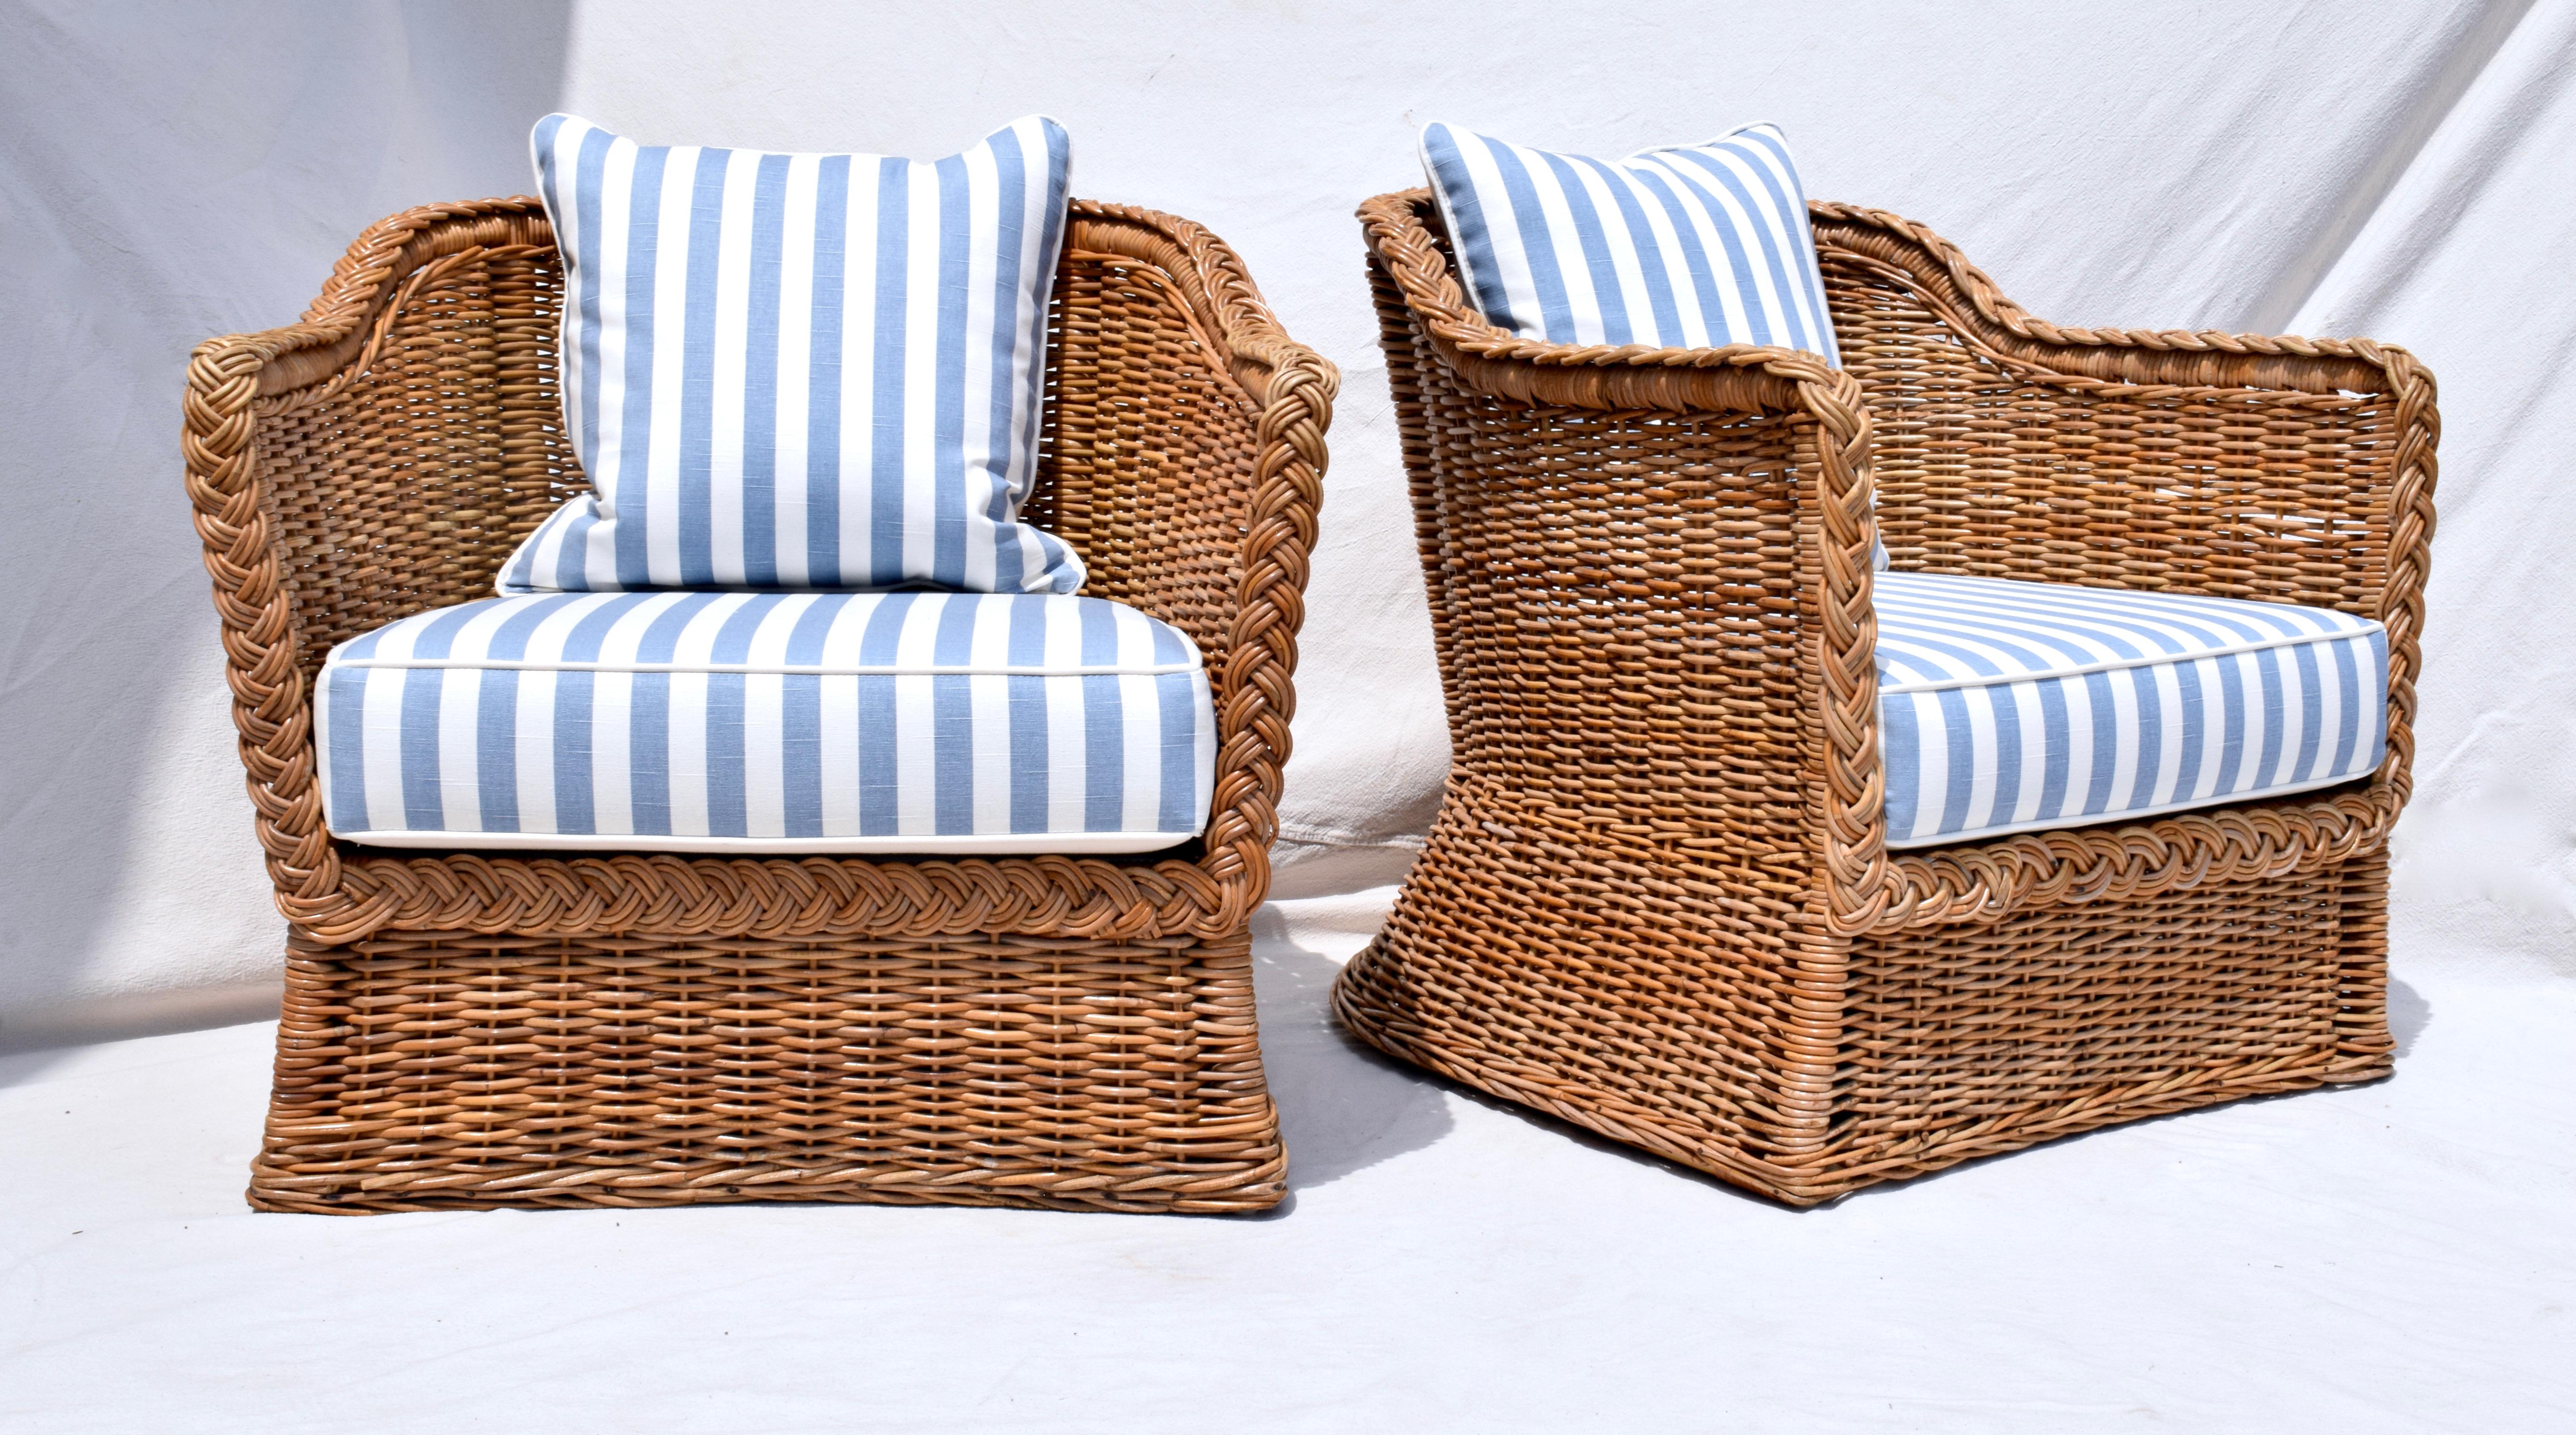 Exceptional pair if 1960's Wicker Works of San Francisco braided wicker rattan armchairs with new custom seat cushions, deck & goose down back cushions upholstered in new stock vintage Ralph Lauren sky blue and white cotton linen. Seats: 16